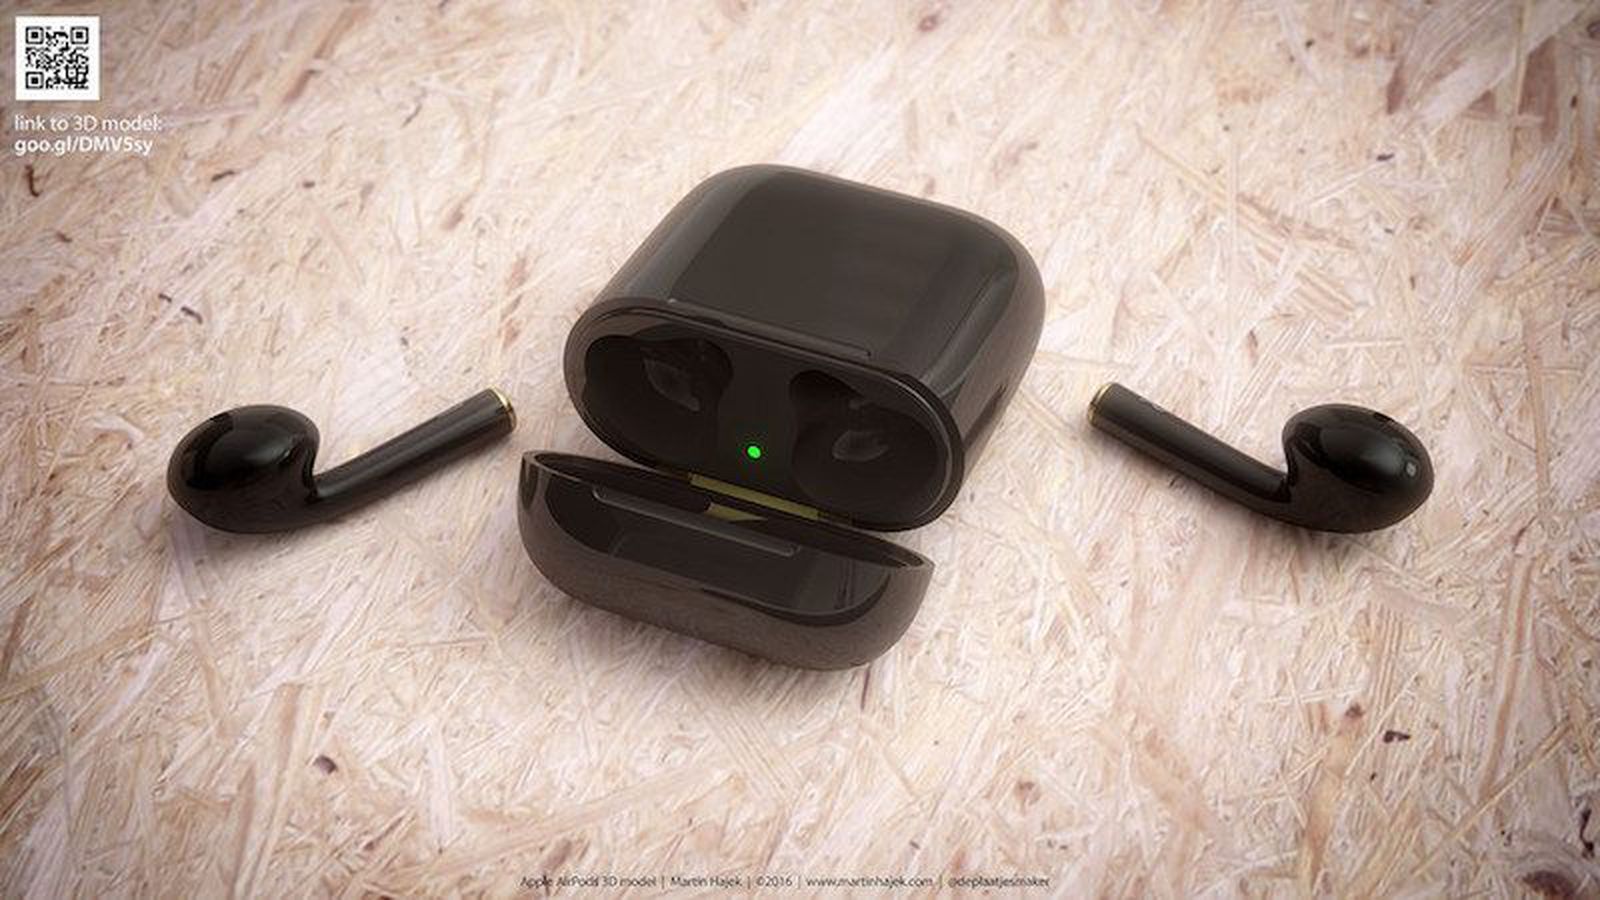 biograf let Allergisk Black AirPods: Where Are They? - MacRumors